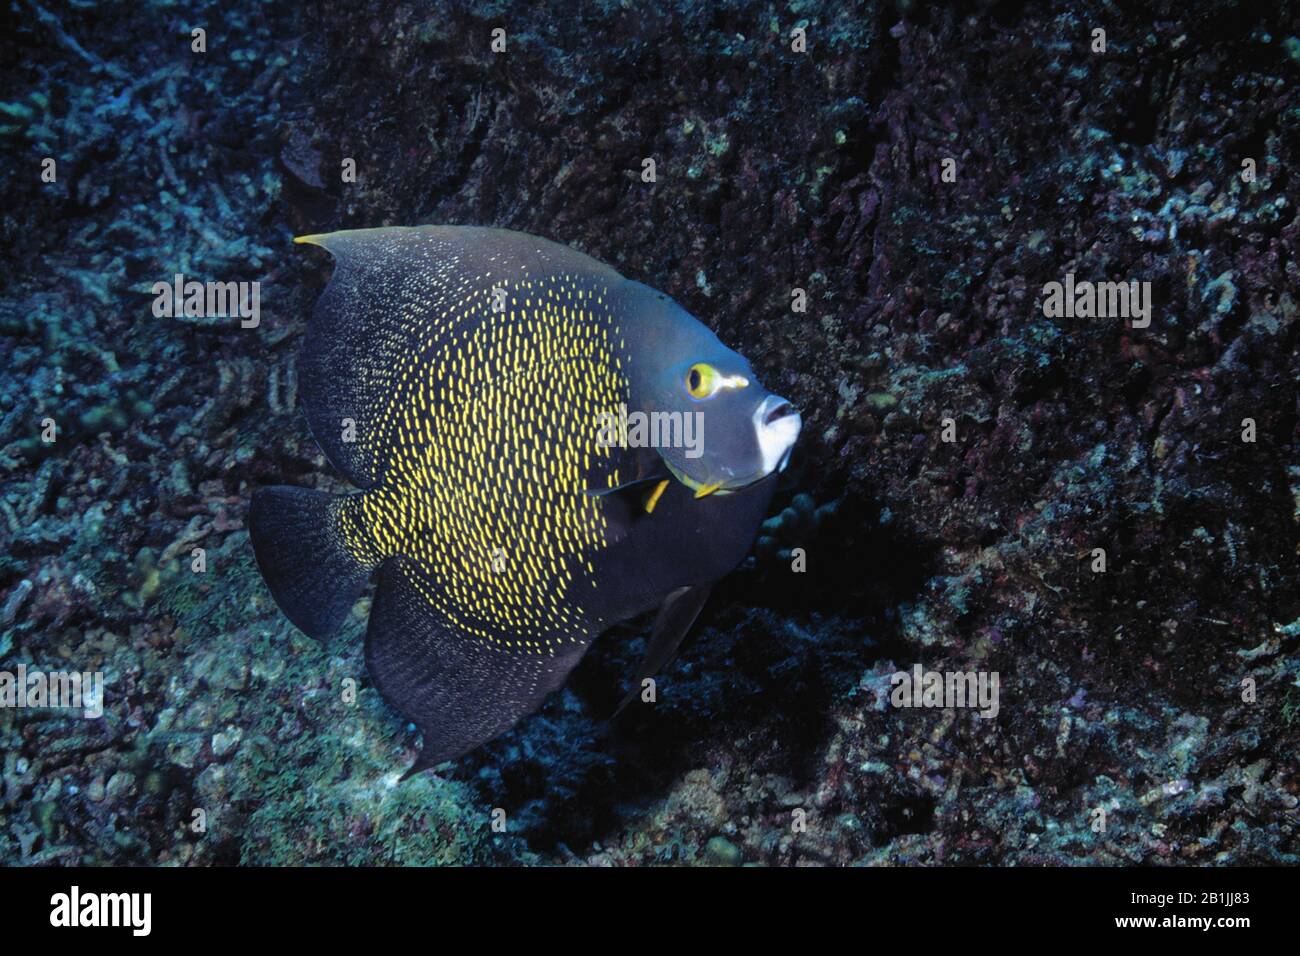 French angelfish (Pomacanthus paru), lateral view, Netherlands Antilles, Curacao Stock Photo